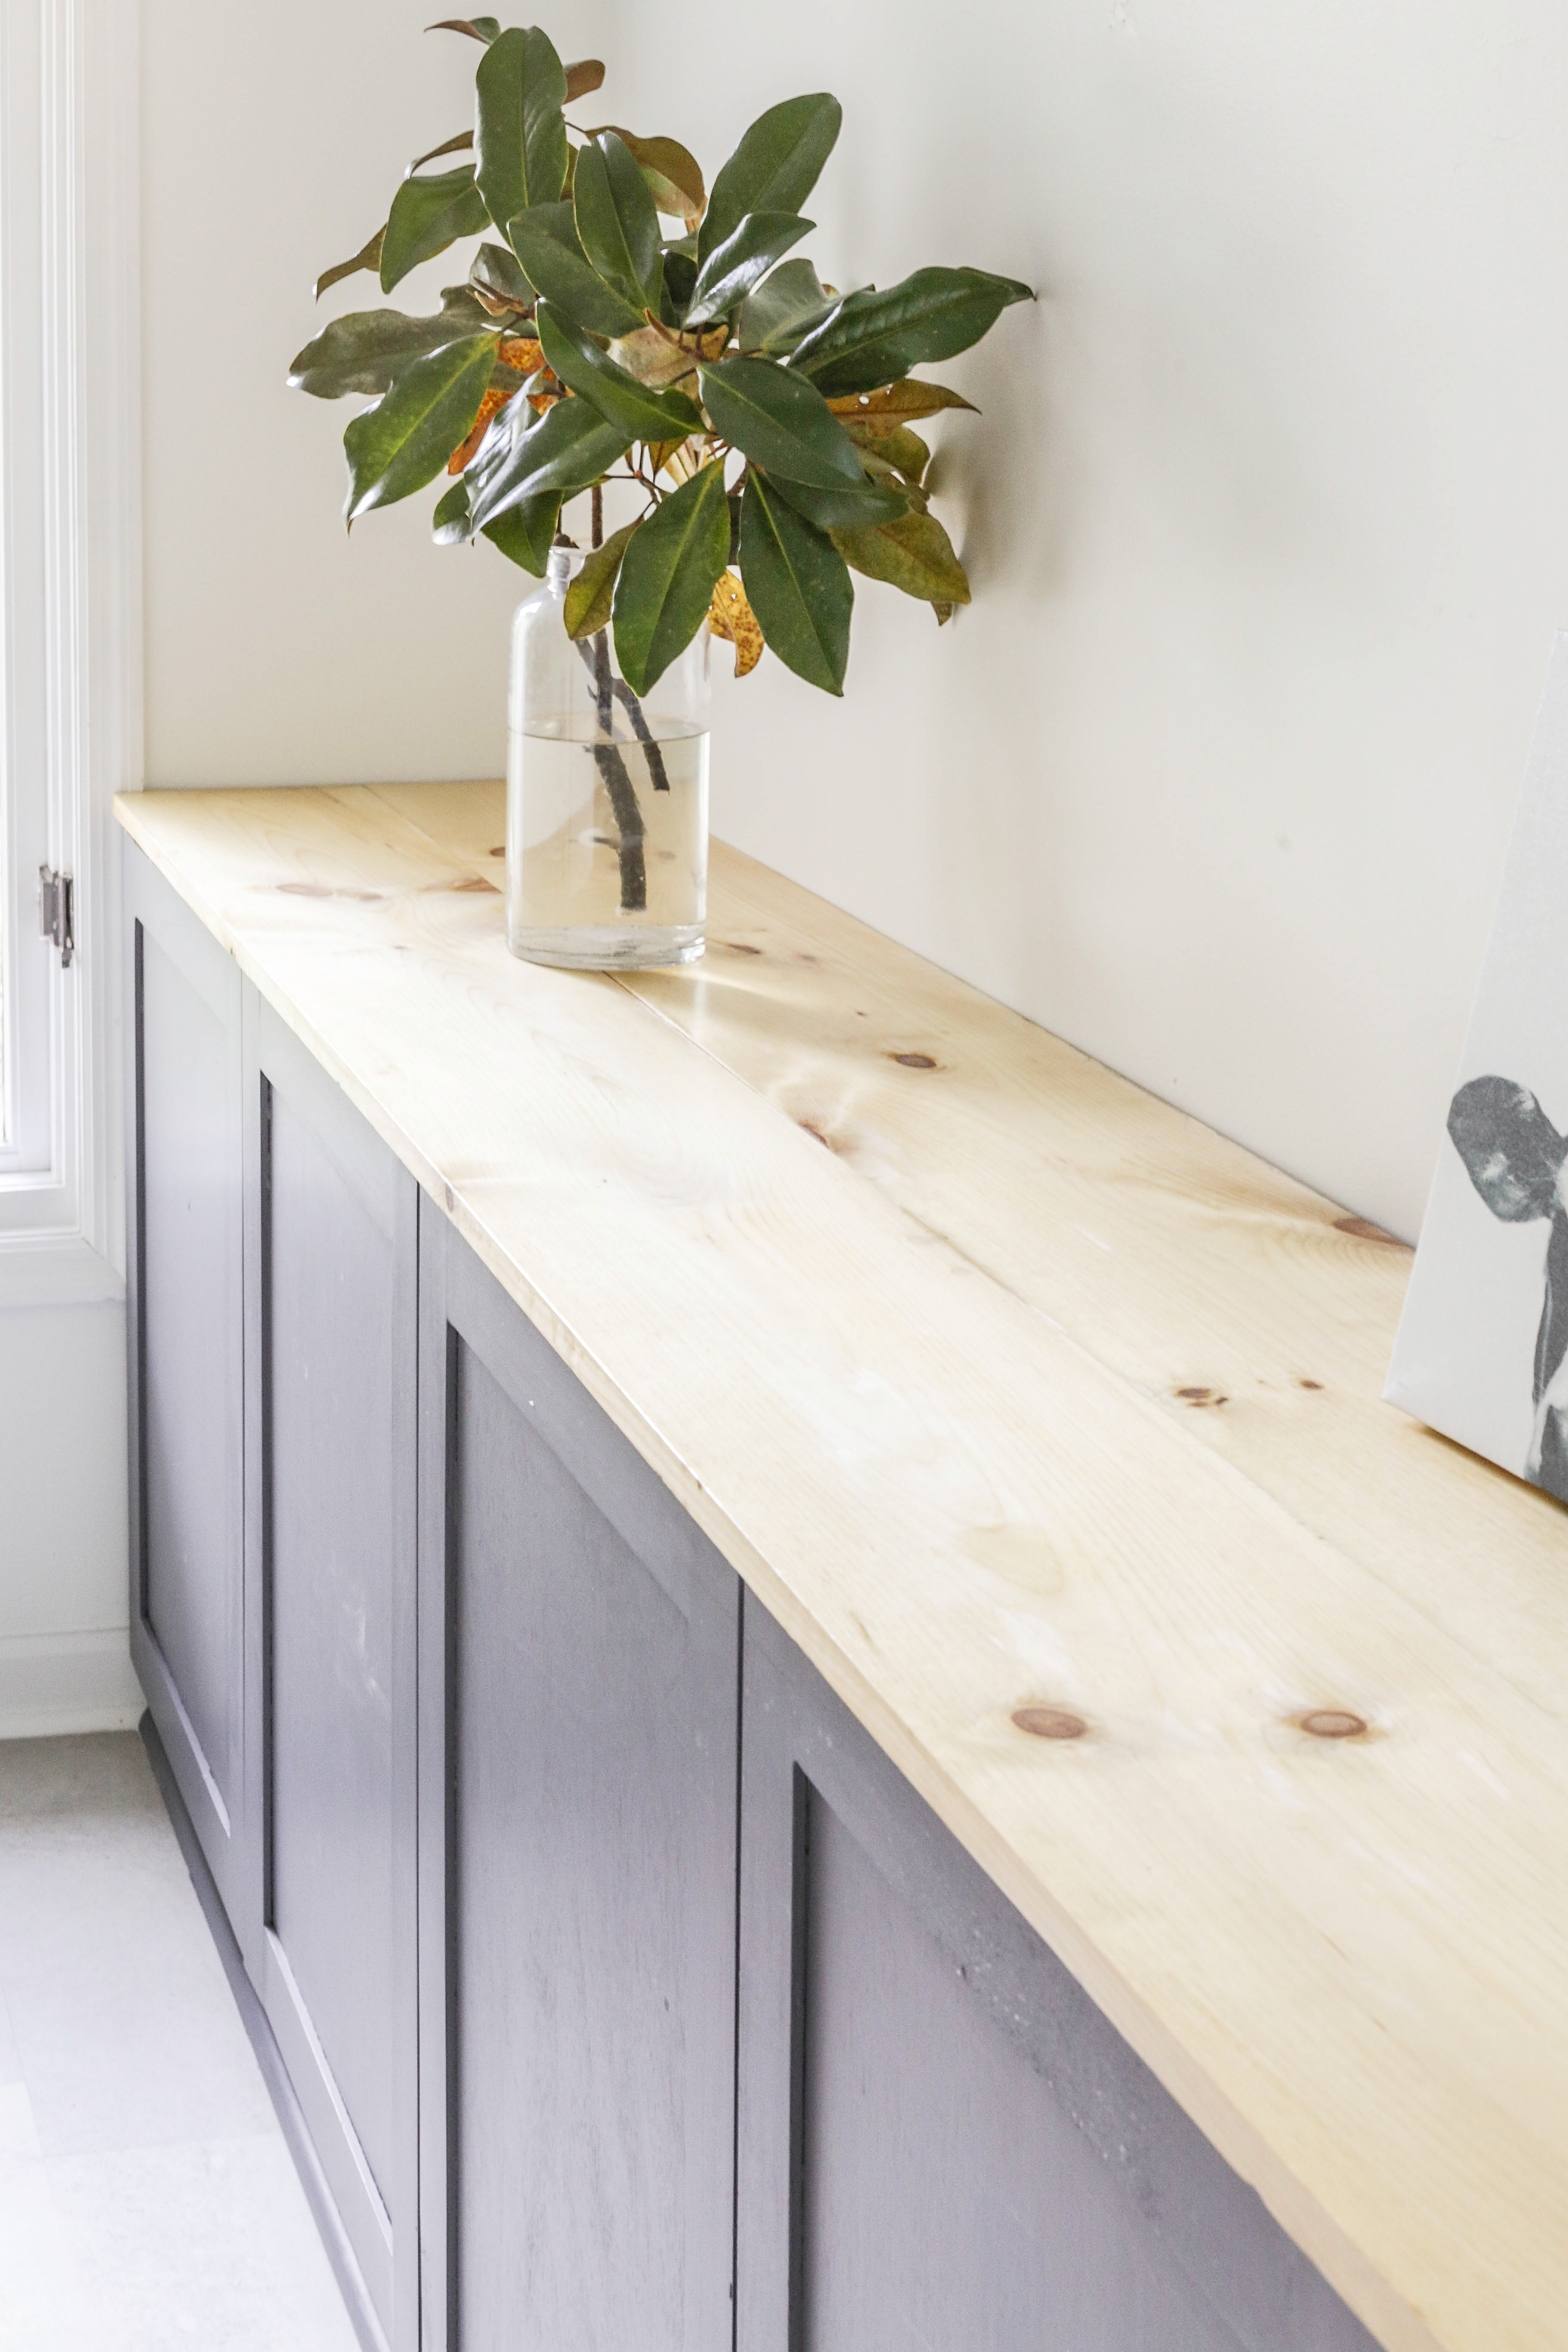 Diy Wood Countertops For Under 50, How To Build A Wooden Kitchen Countertop